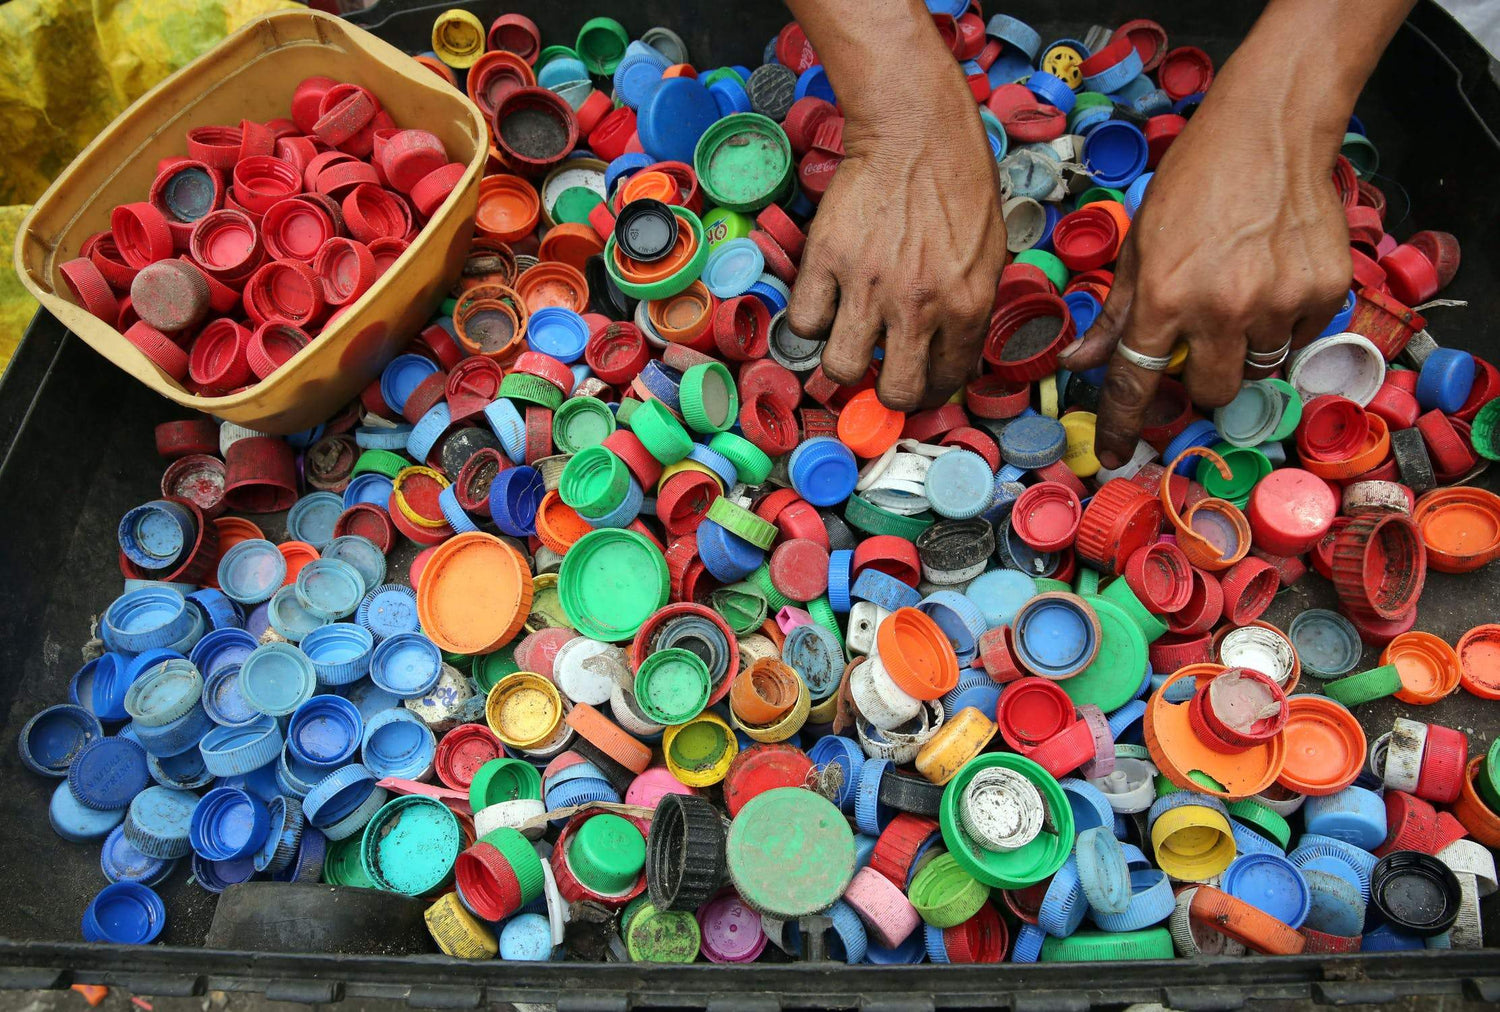 The lifecycle of plastic and why it matters